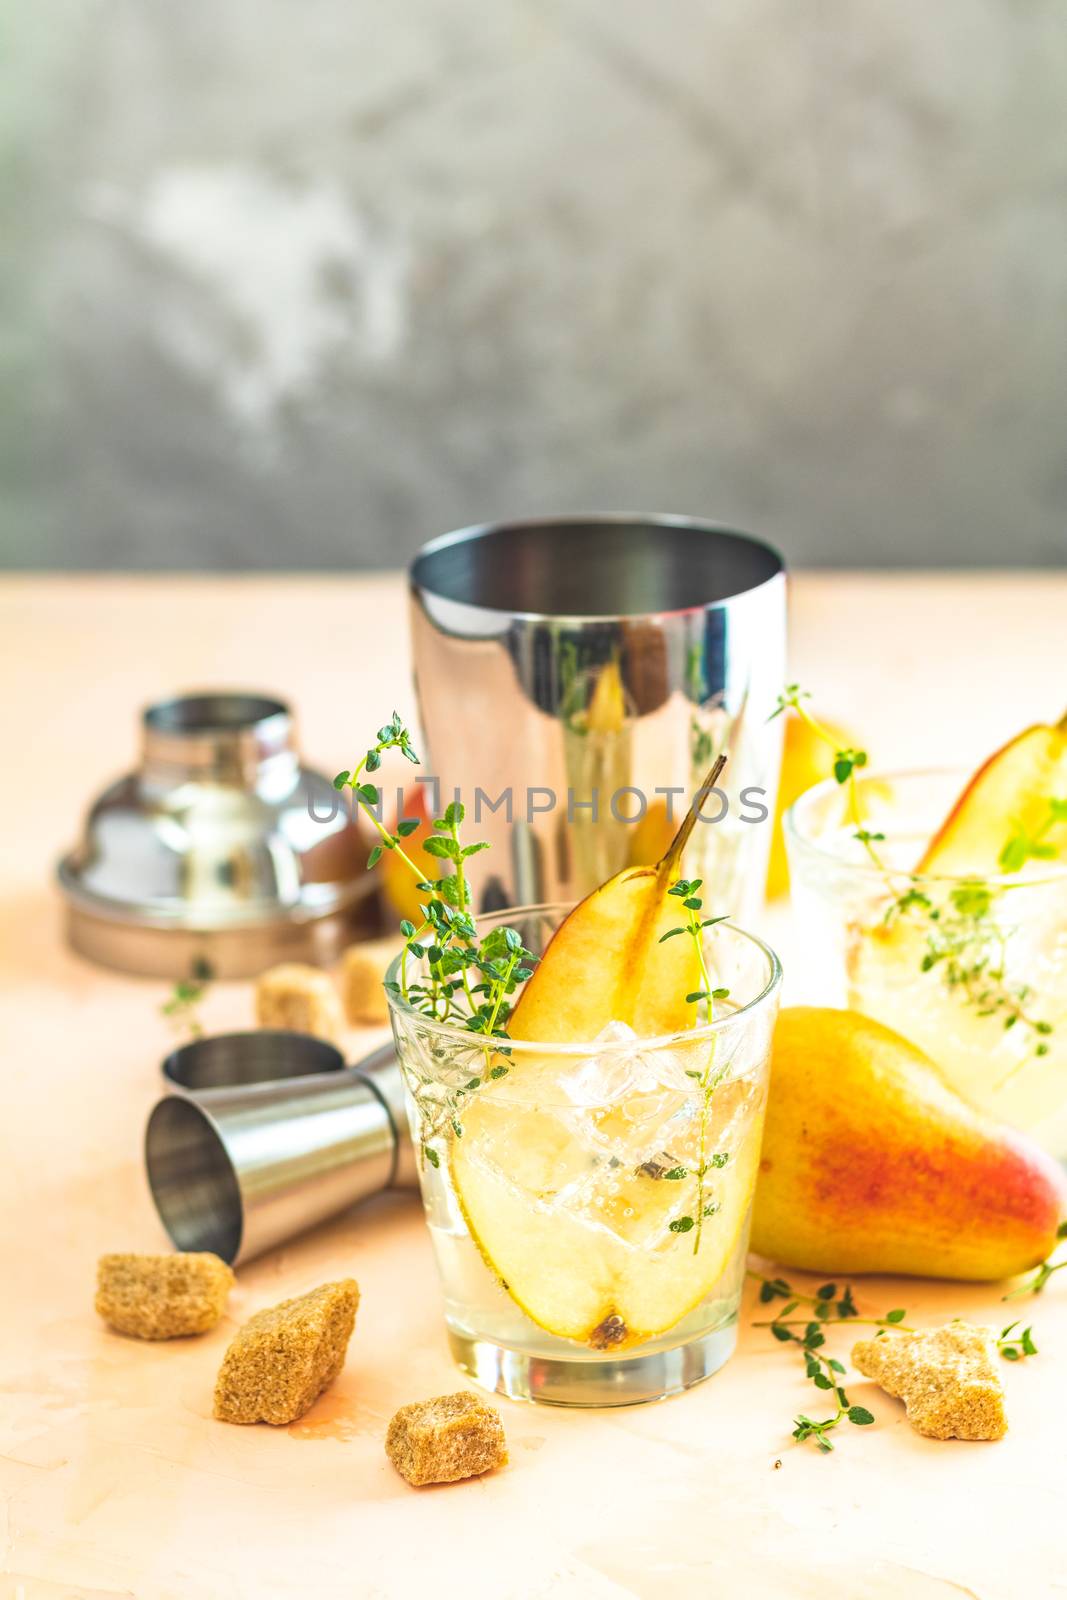 Pear mulled cider with thyme, brown sugar and ice  on light concrete surface table